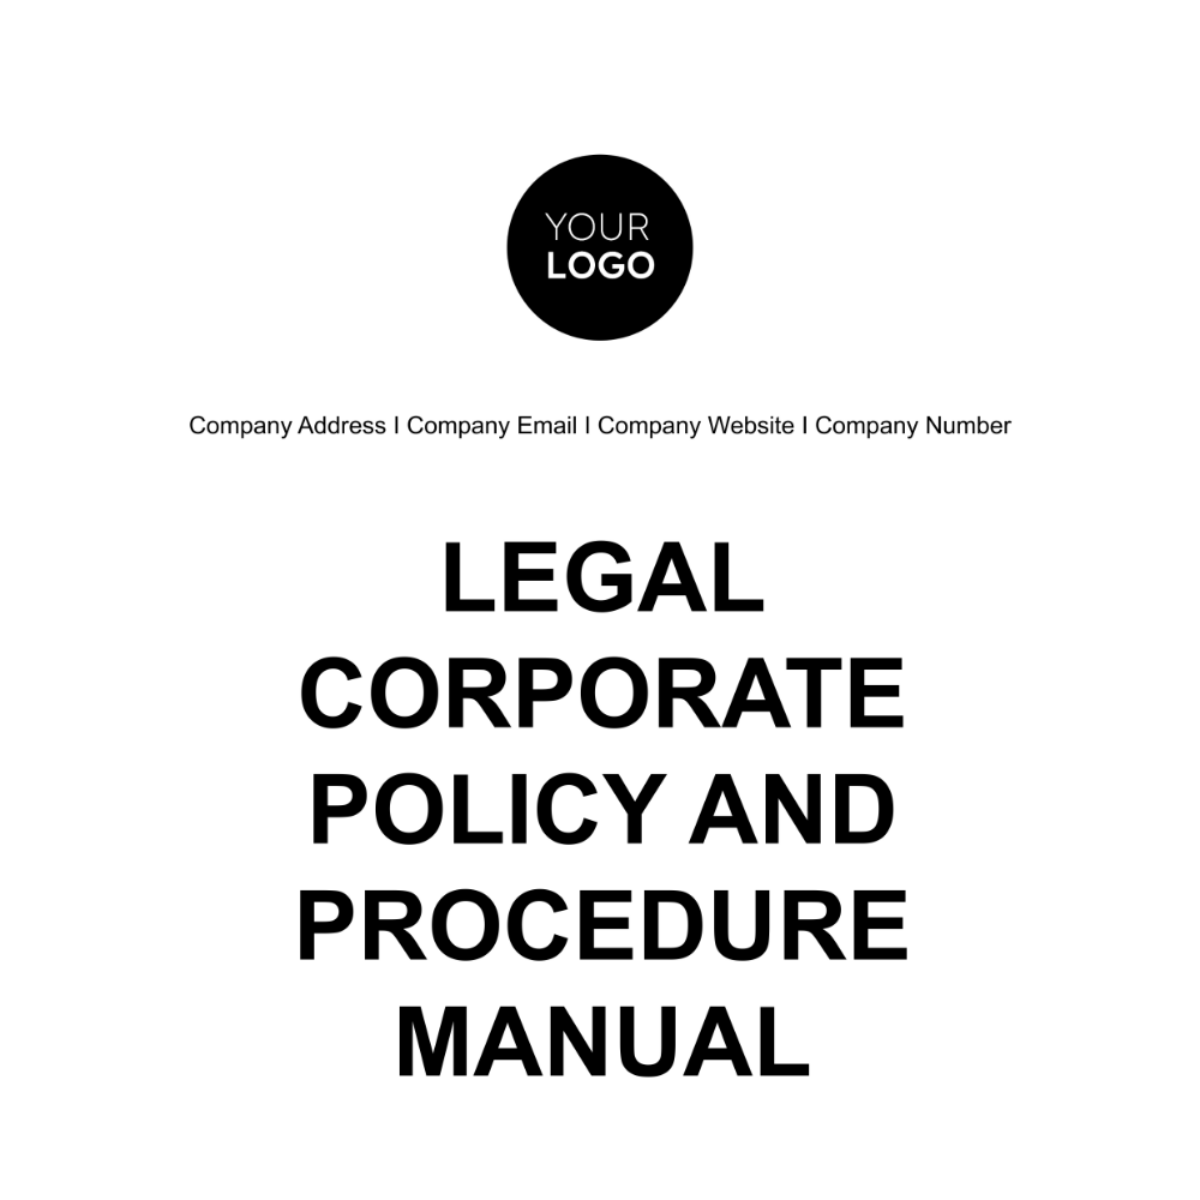 Free Legal Corporate Policy and Procedure Manual Template